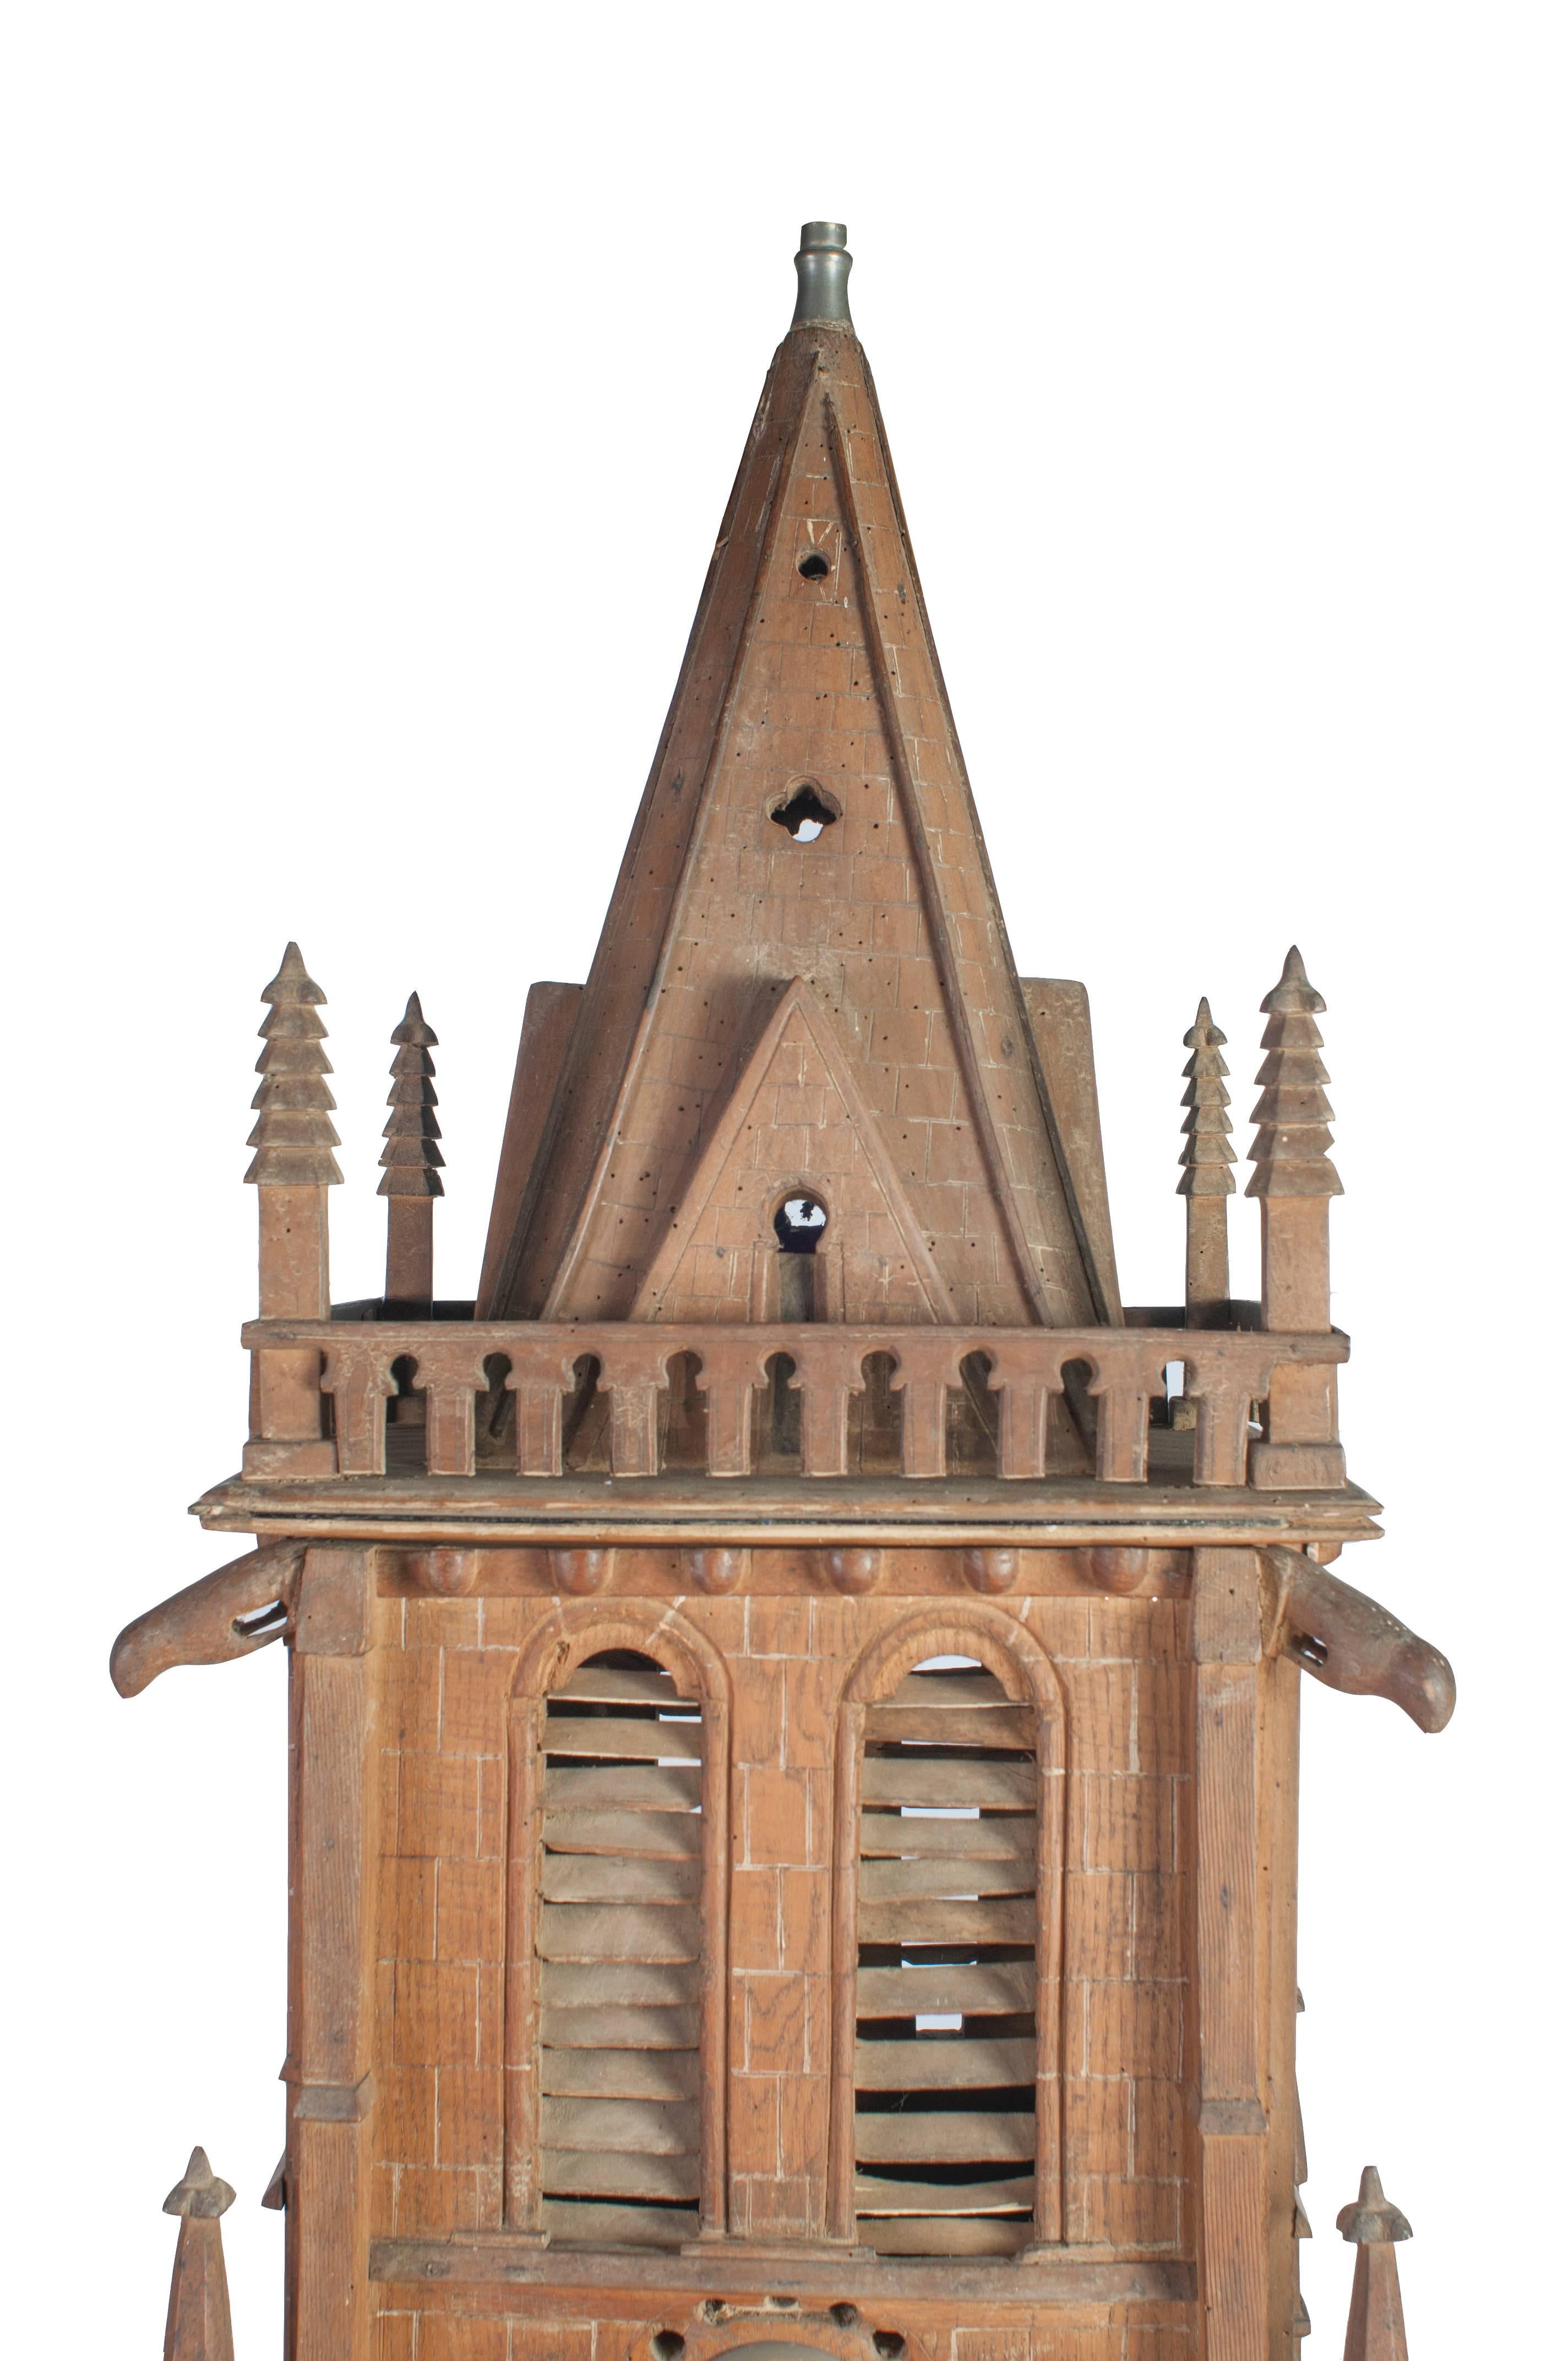 Painted miniature Normandy church. Two pieces.
The doors on the bottom level open.